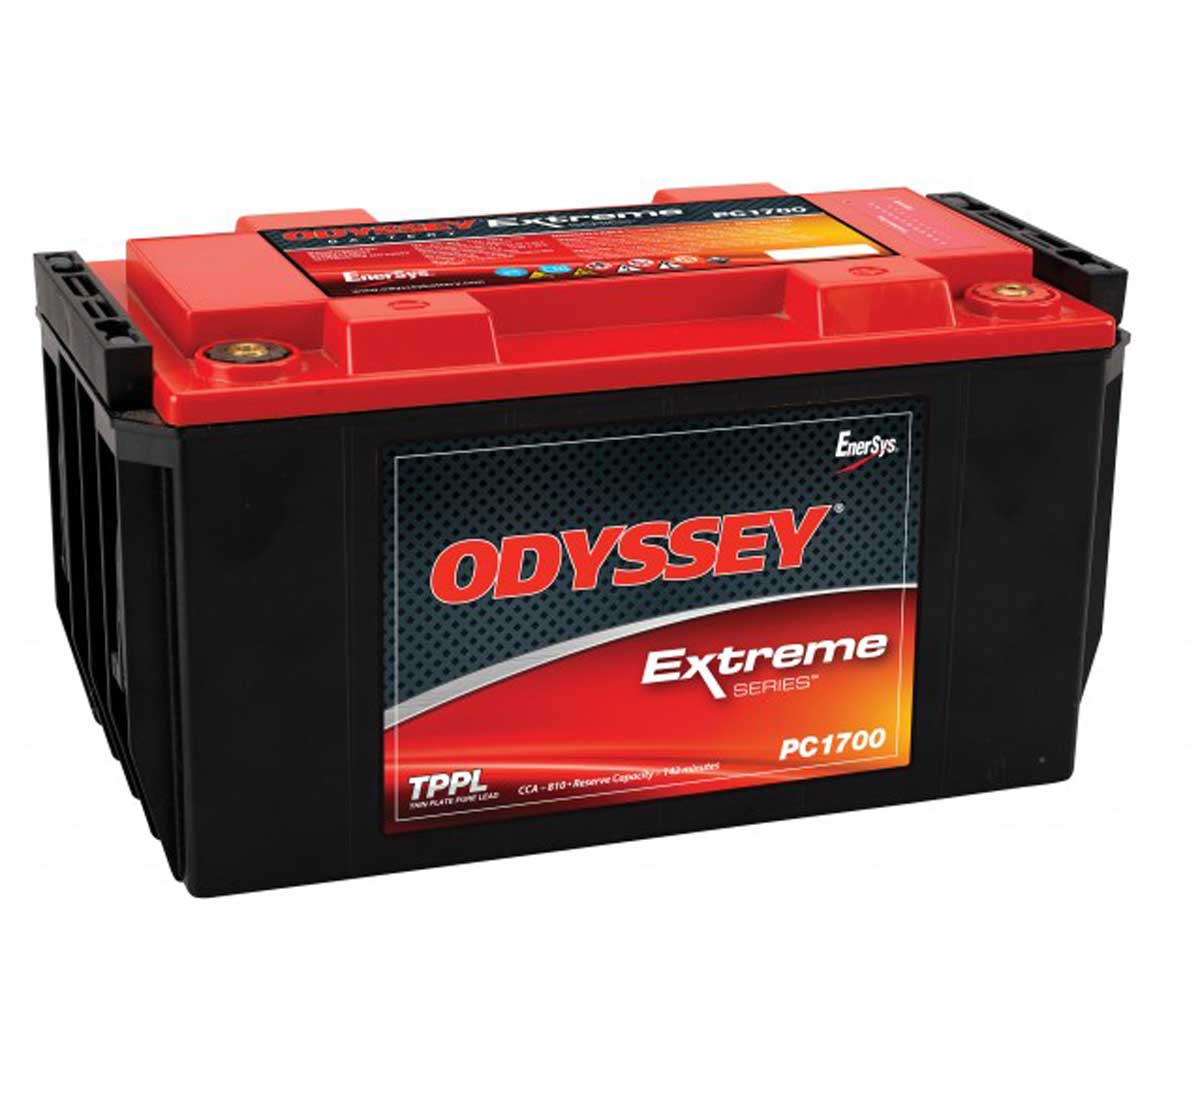 Odyssey ODS-AGM70 PC1700 Extreme Racing Battery